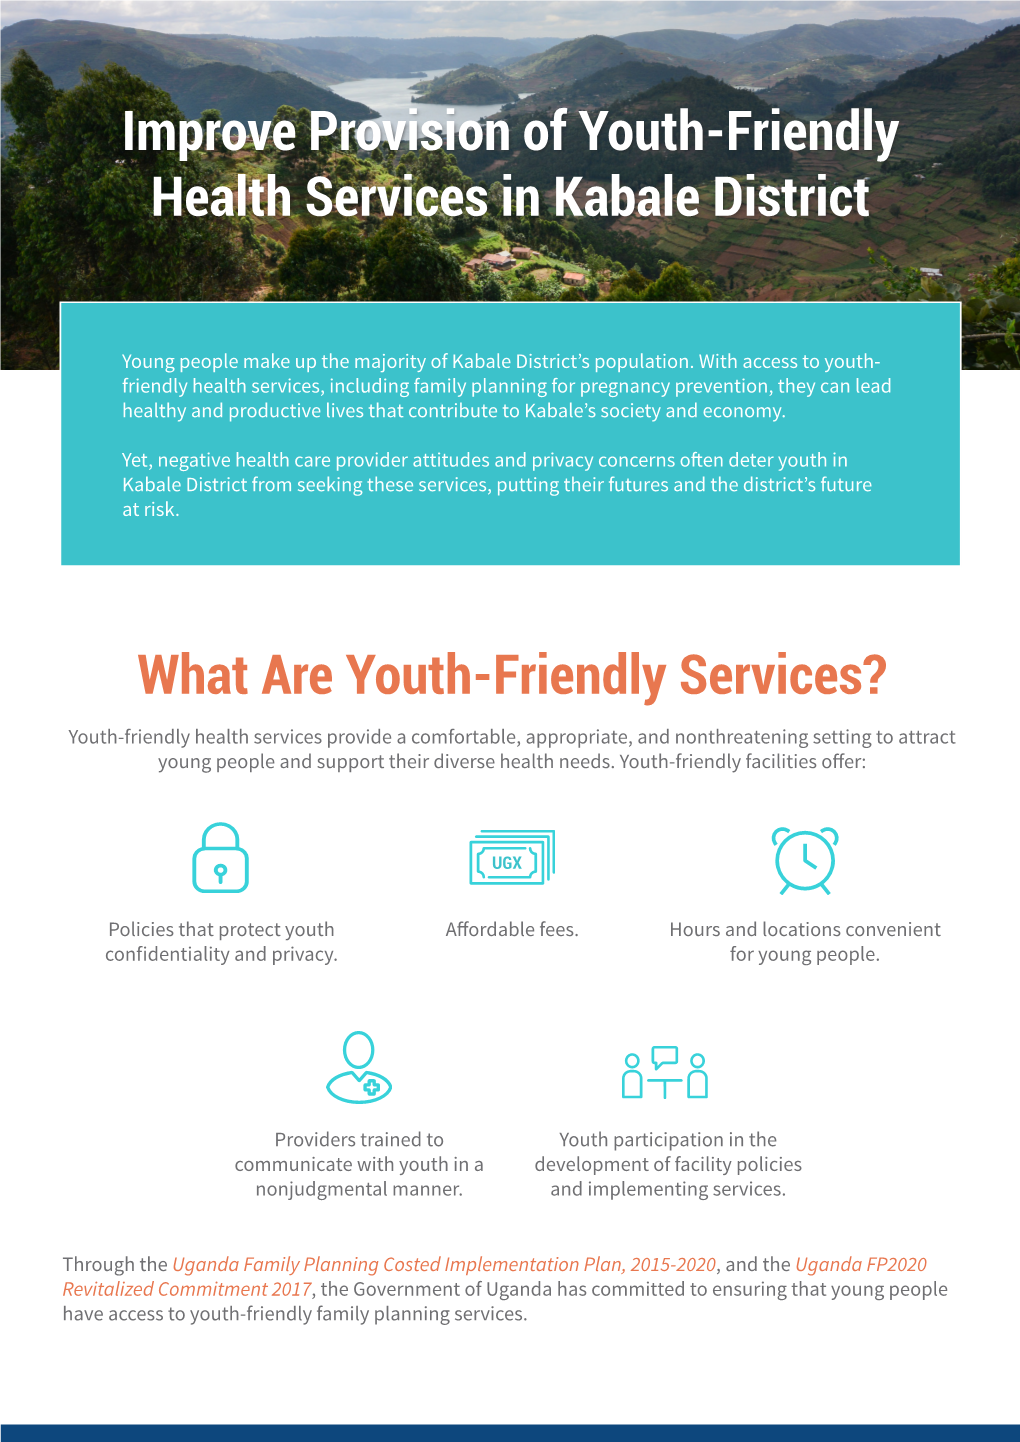 What Are Youth-Friendly Services?